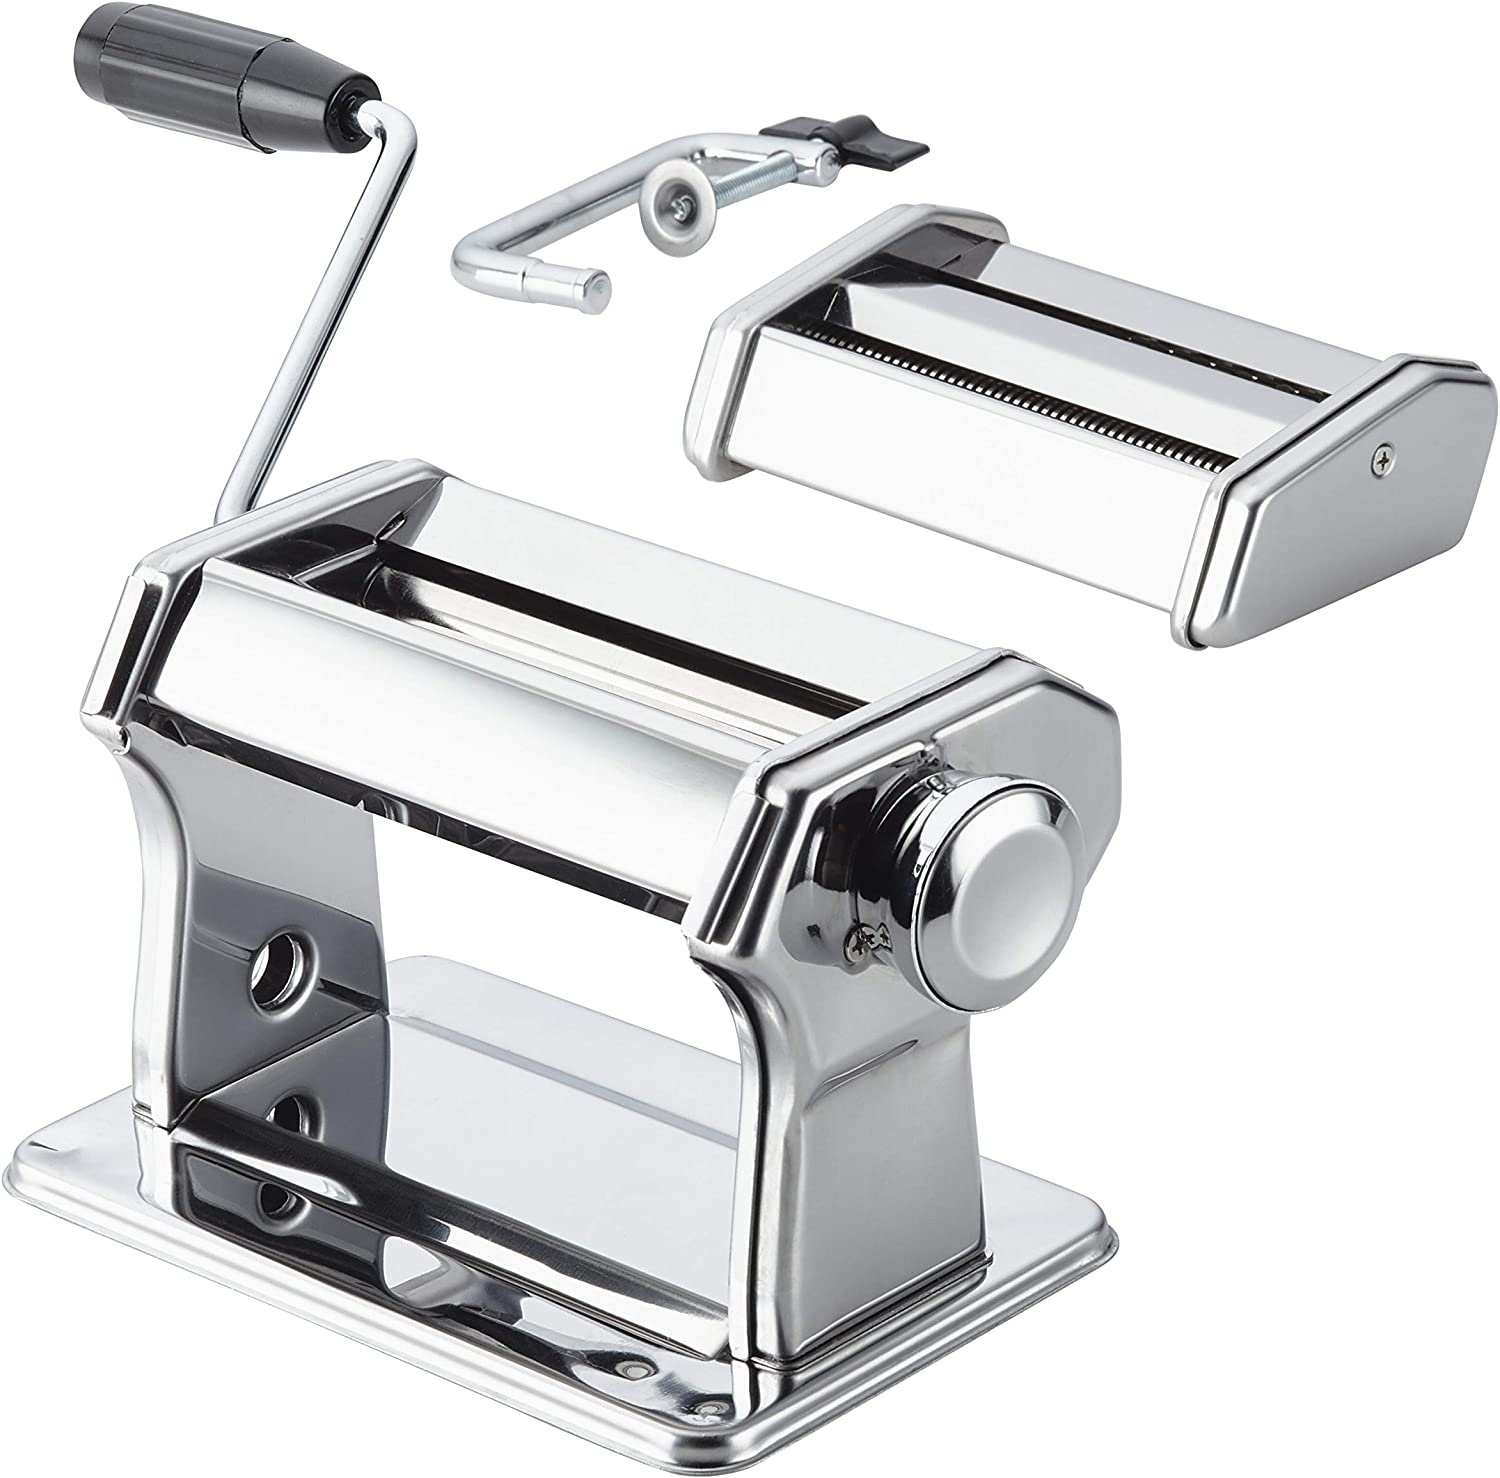 Anolon Gourmet Prep Chrome Plated Pasta Maker Import To Shop ×Product customization General Description Gallery Reviews